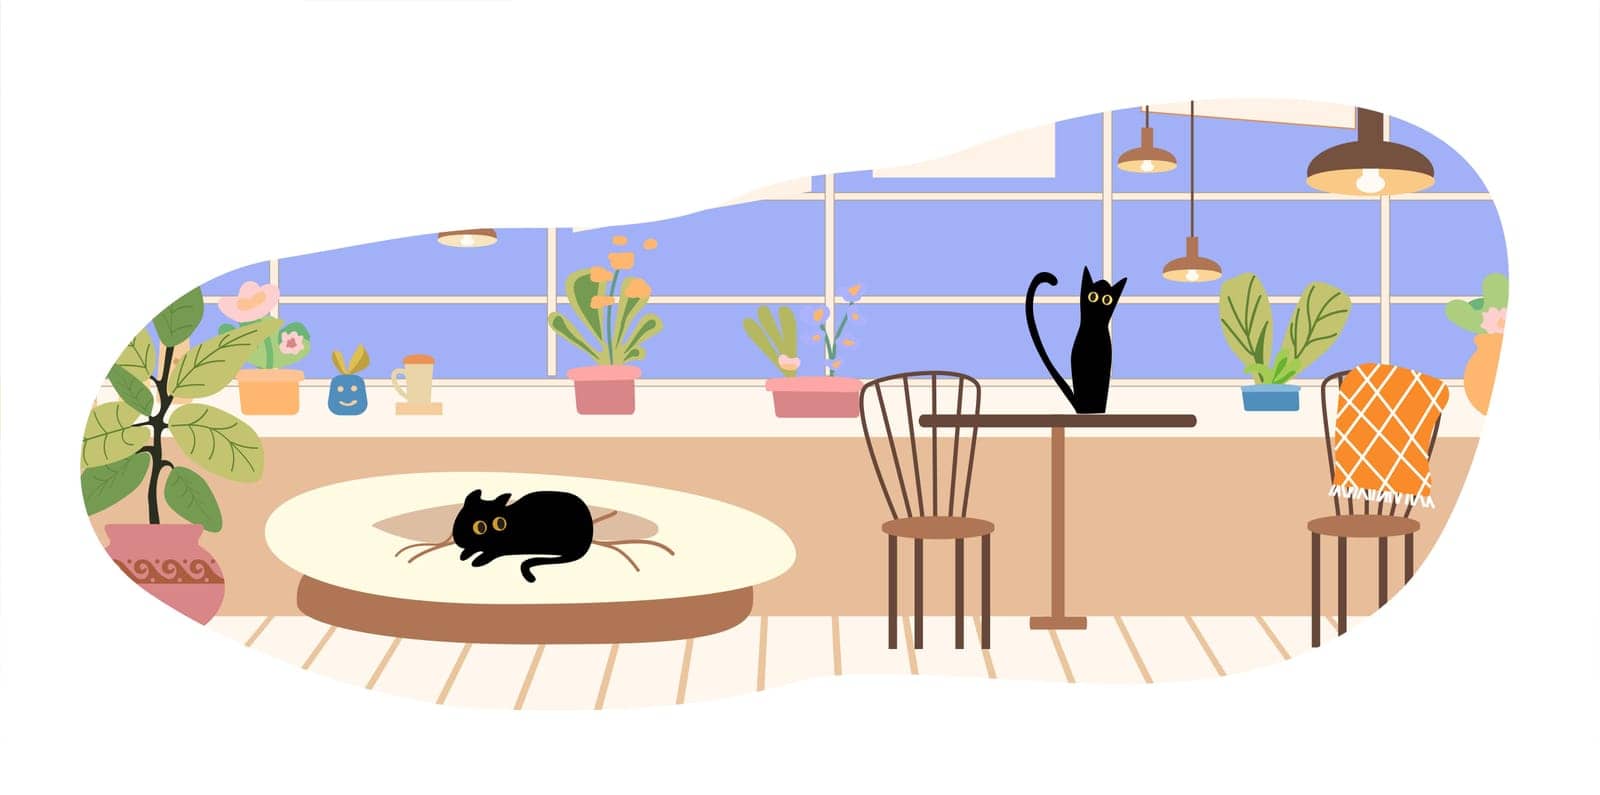 Pet cats and dogs in home apartment. Happy domestic animals flat vector illustration. Interior. Friendship, love for pet concept for banner, website design or landing web page